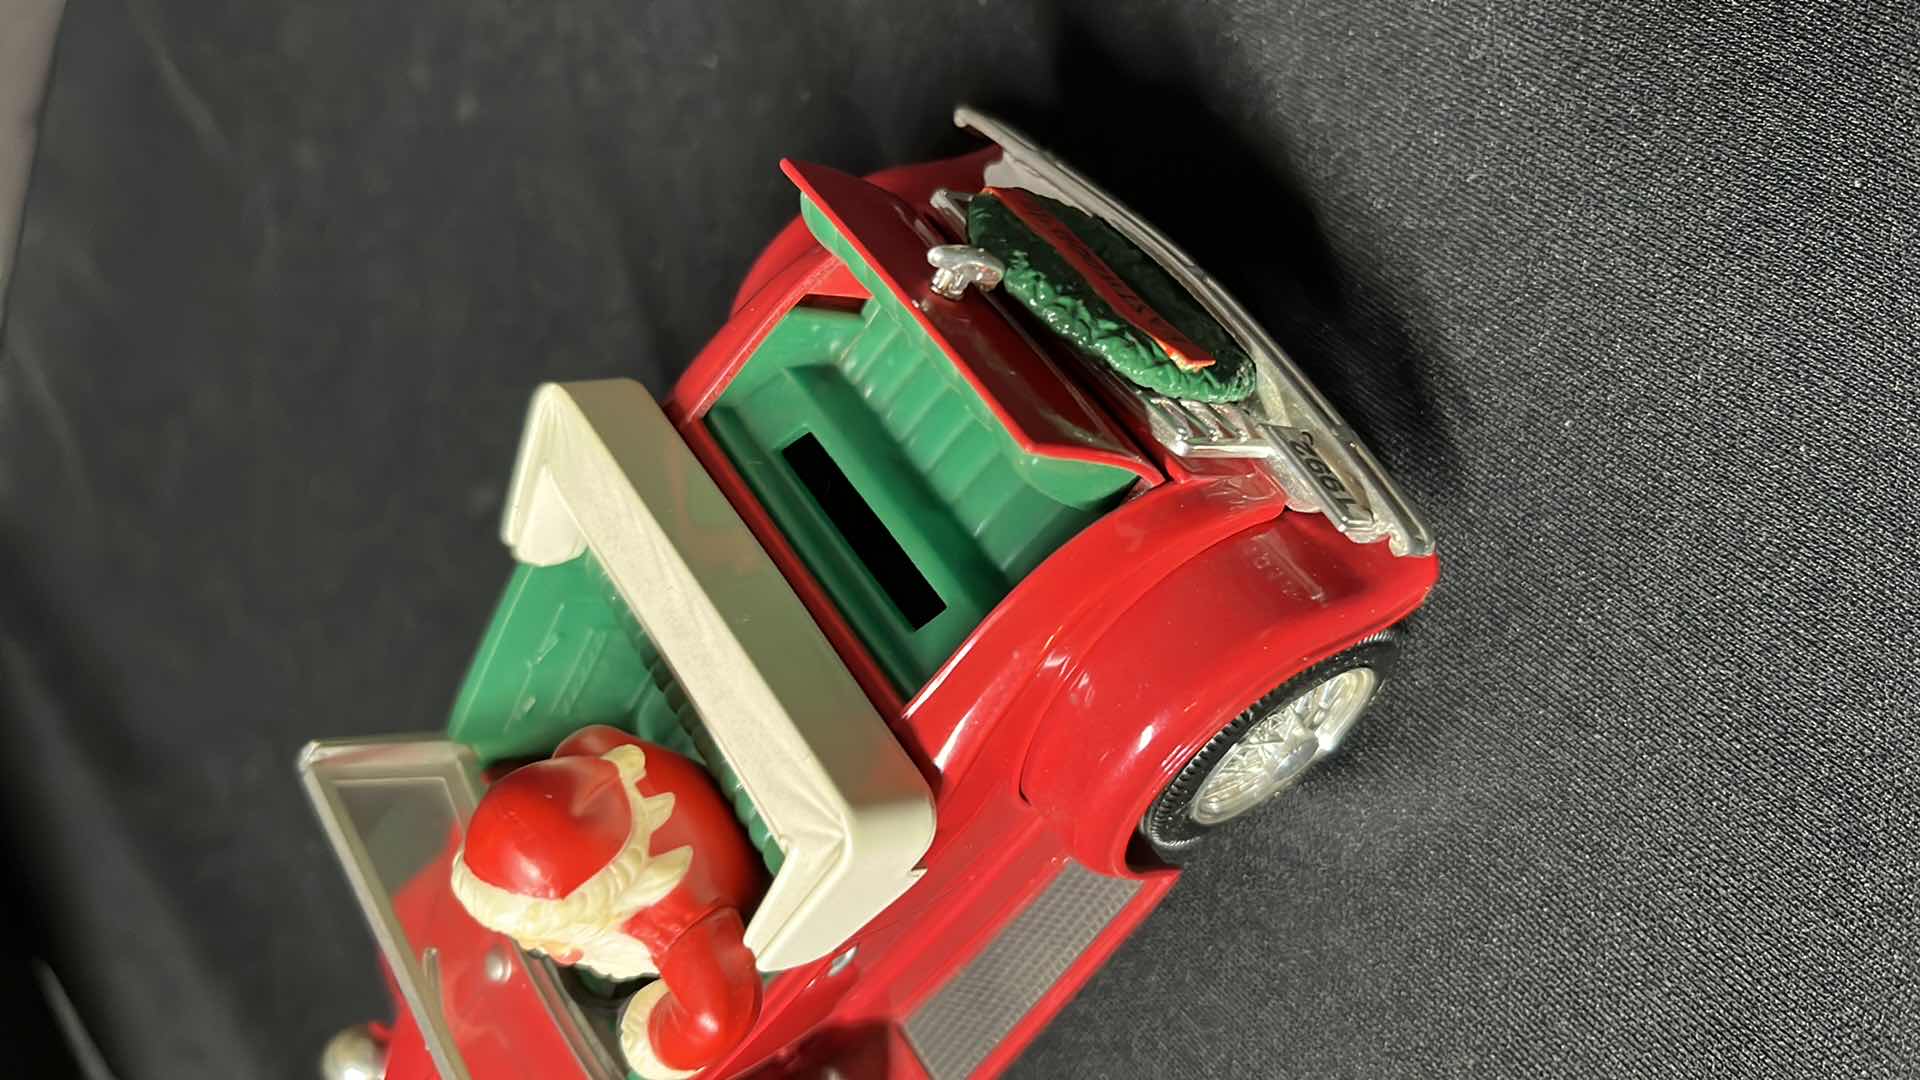 Photo 5 of THE EASTWOOD COMPANY DIE-CAST METAL GORD MODEL A 1992 SANTA’S ROADSTER LOCKING COIN BANK W KEY (STOCK #1928)